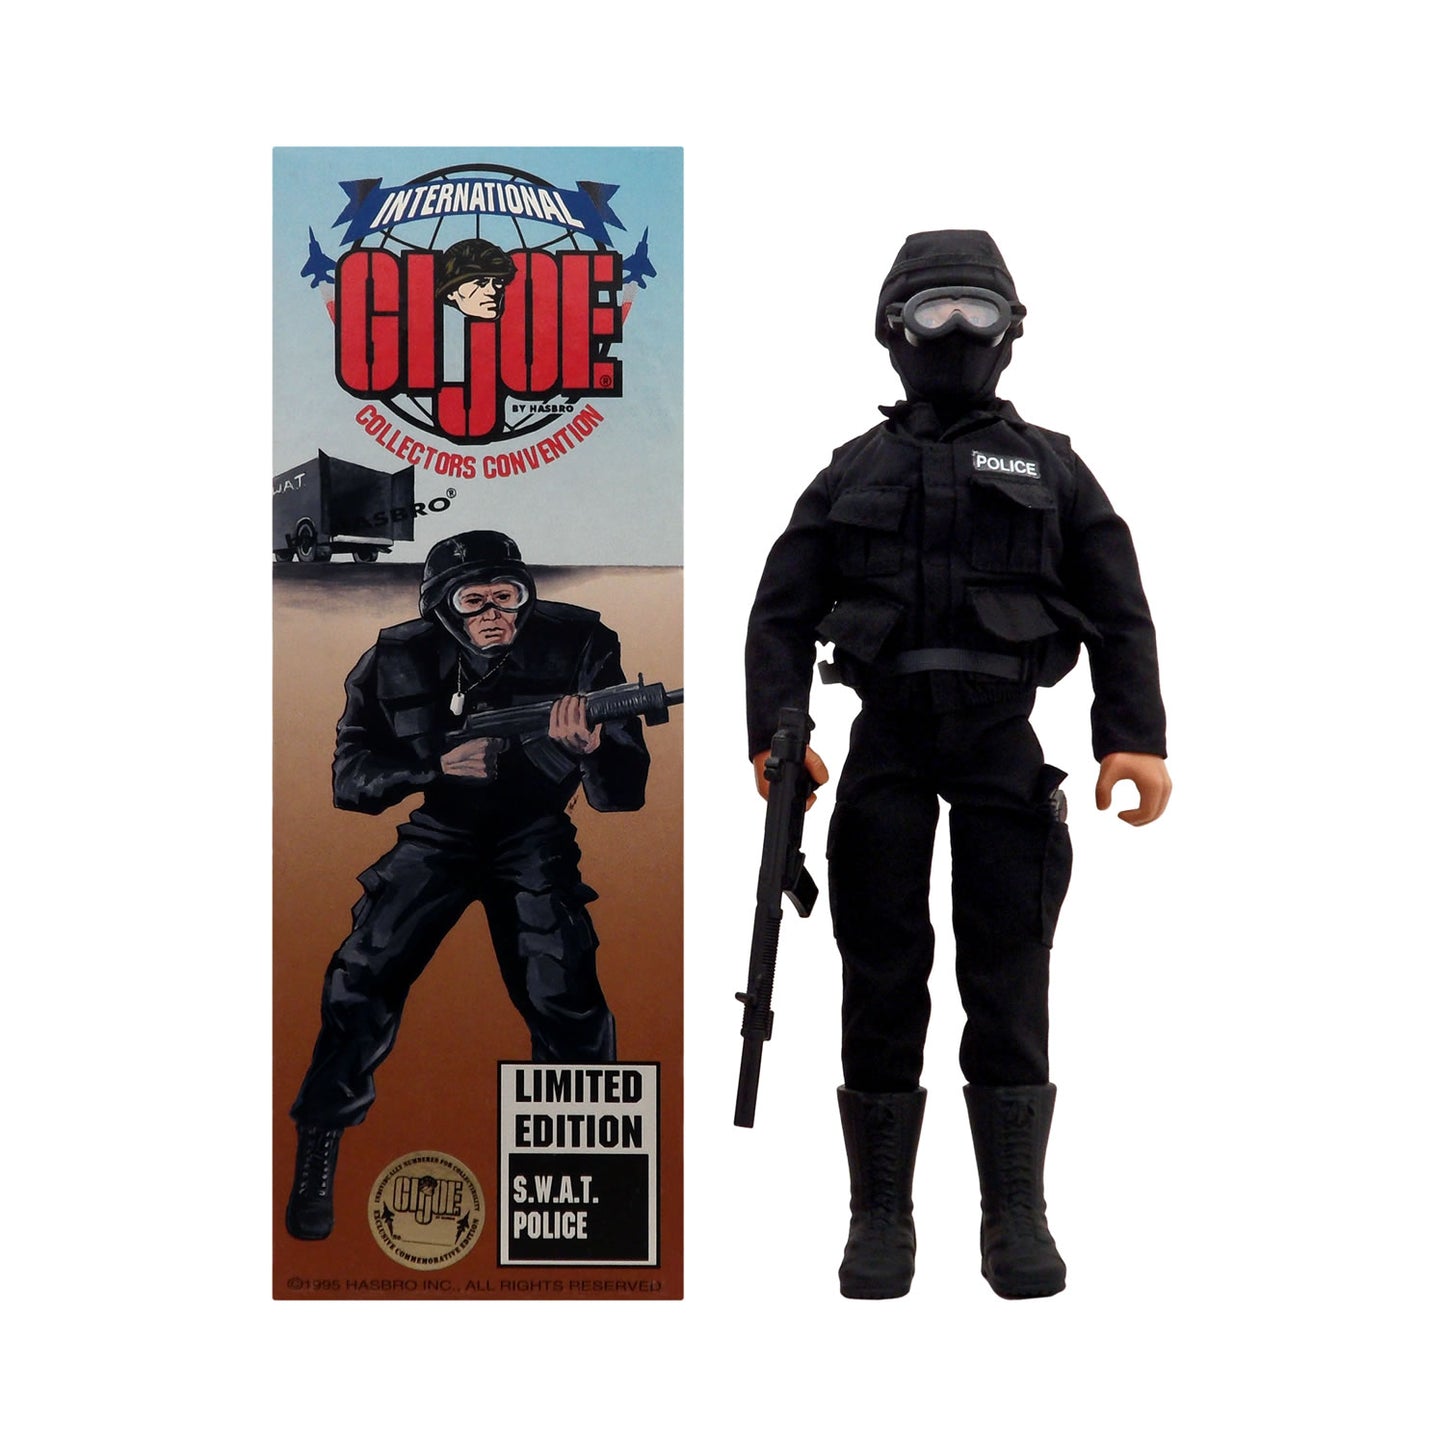 1995 International Collectors Convention G.I. Joe S.W.A.T. Police